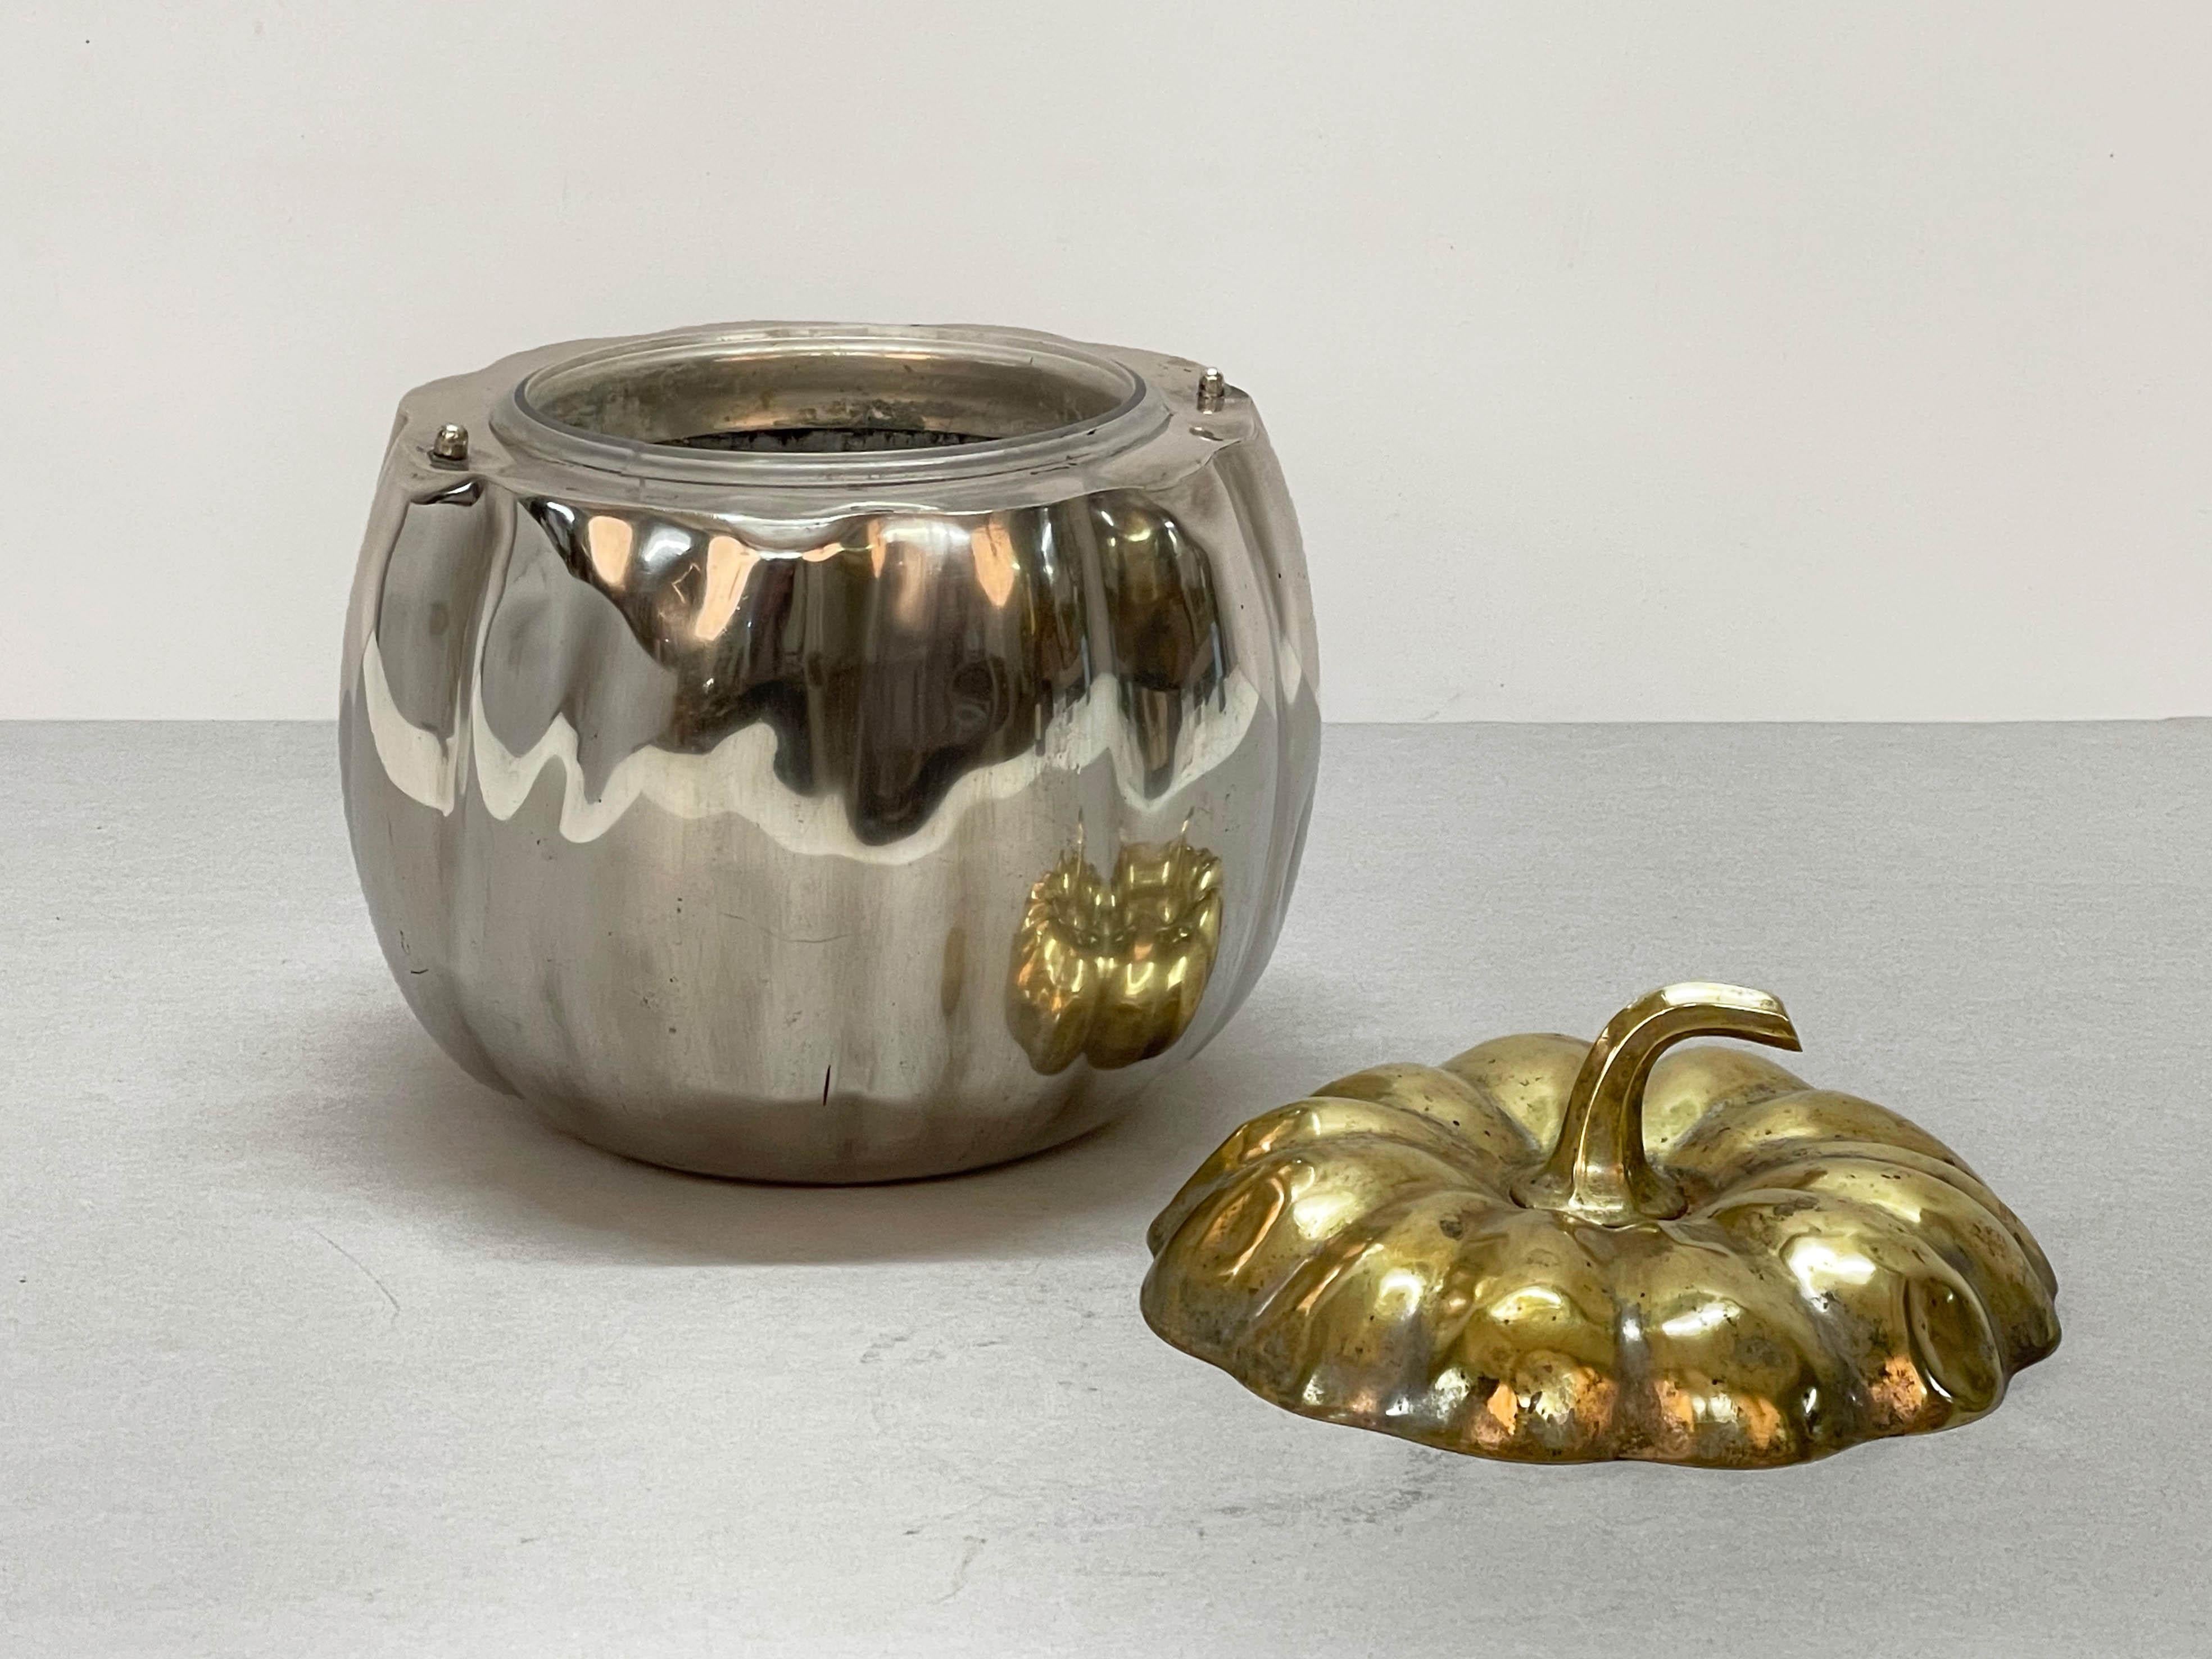 Teghini Firenze Midcentury Italian Silver and Brass Ice Bucket with Pumpkin Top 5